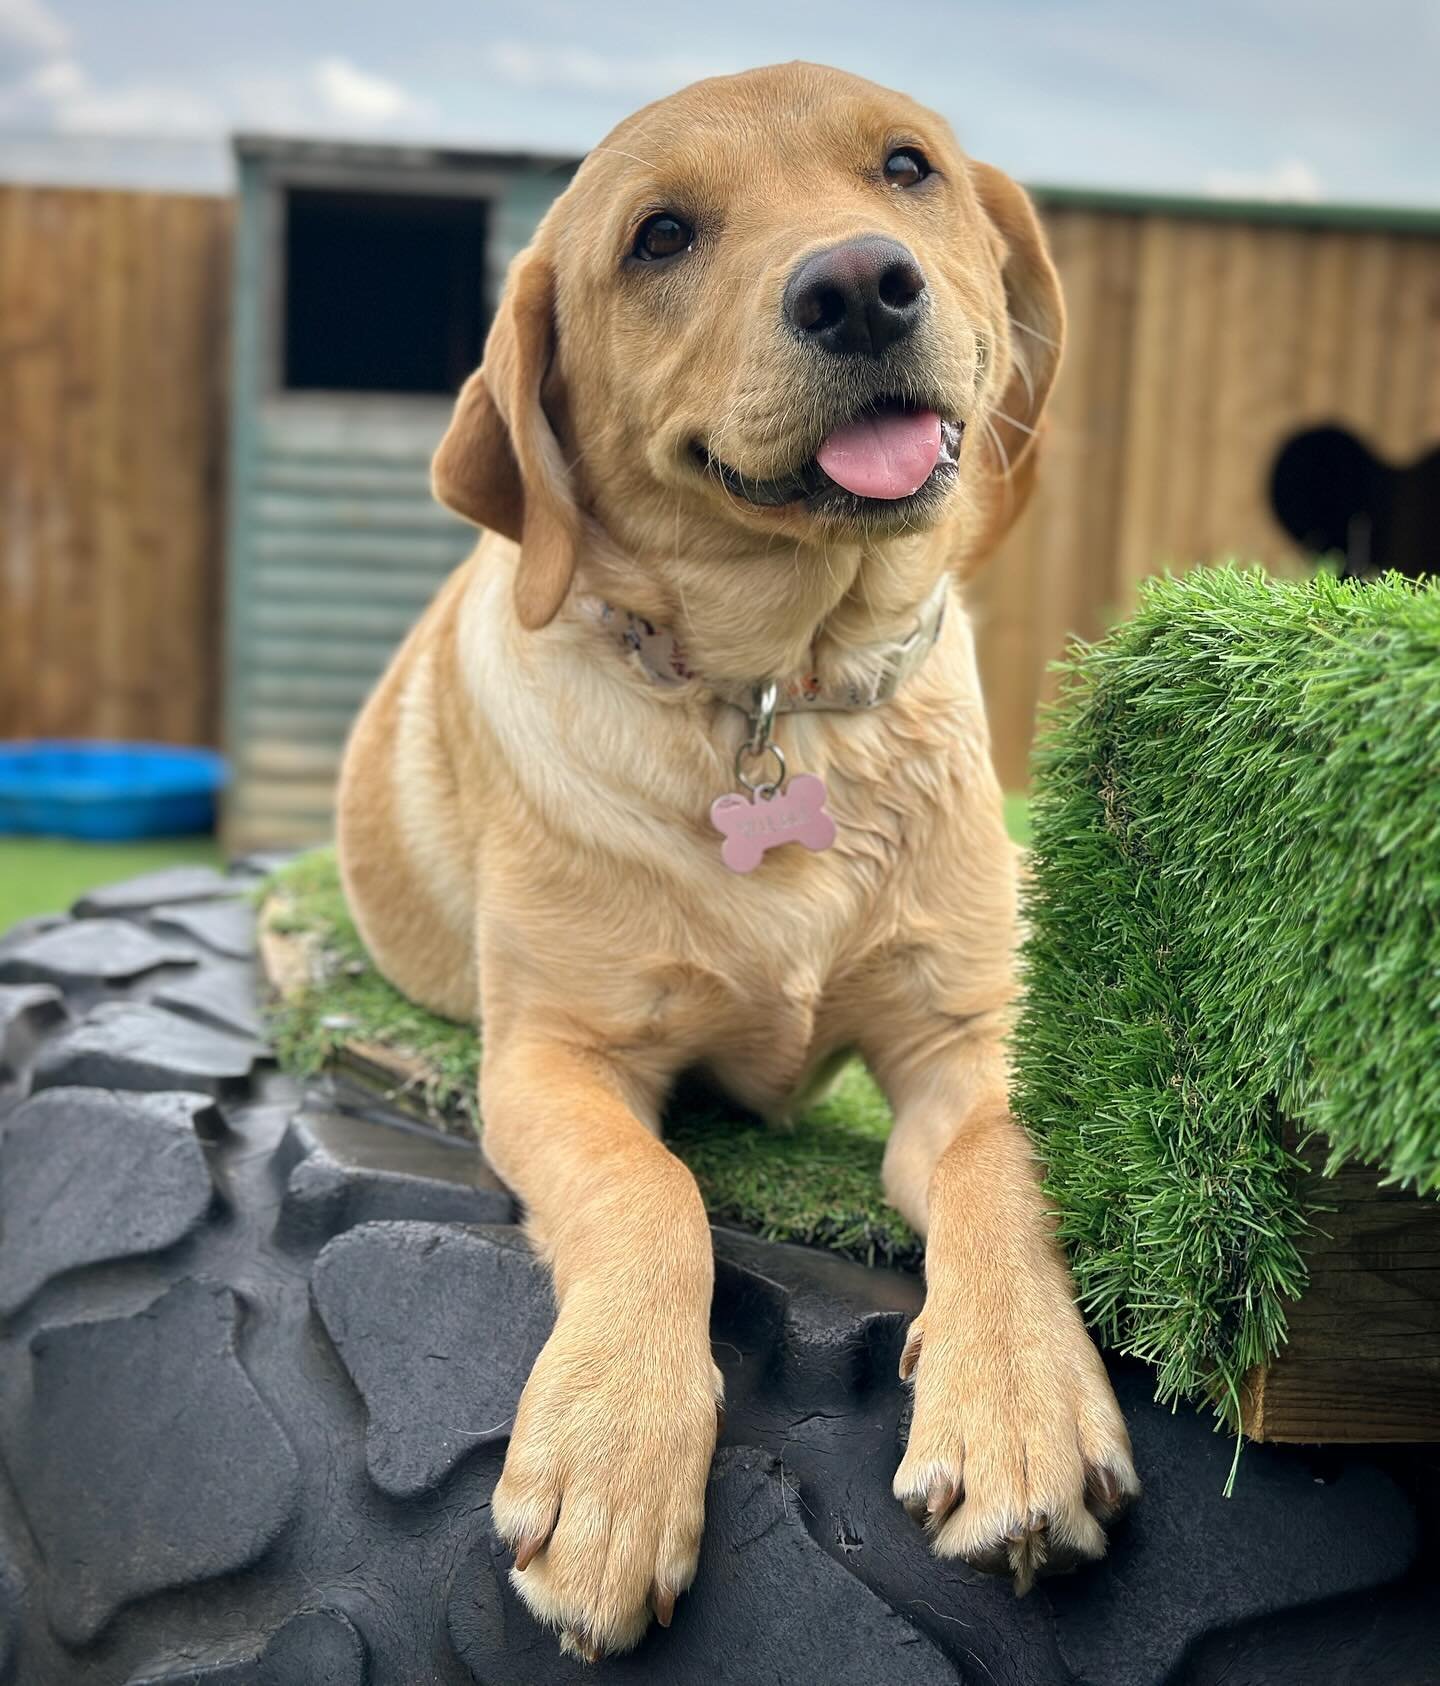 Isn&rsquo;t Wilma just the perfect pretty princess? 👑 🐾
&mdash;
Make sure you come along to our puppy morning tomorrow morning starting at 10am, Completley FREE event! See our website for details!